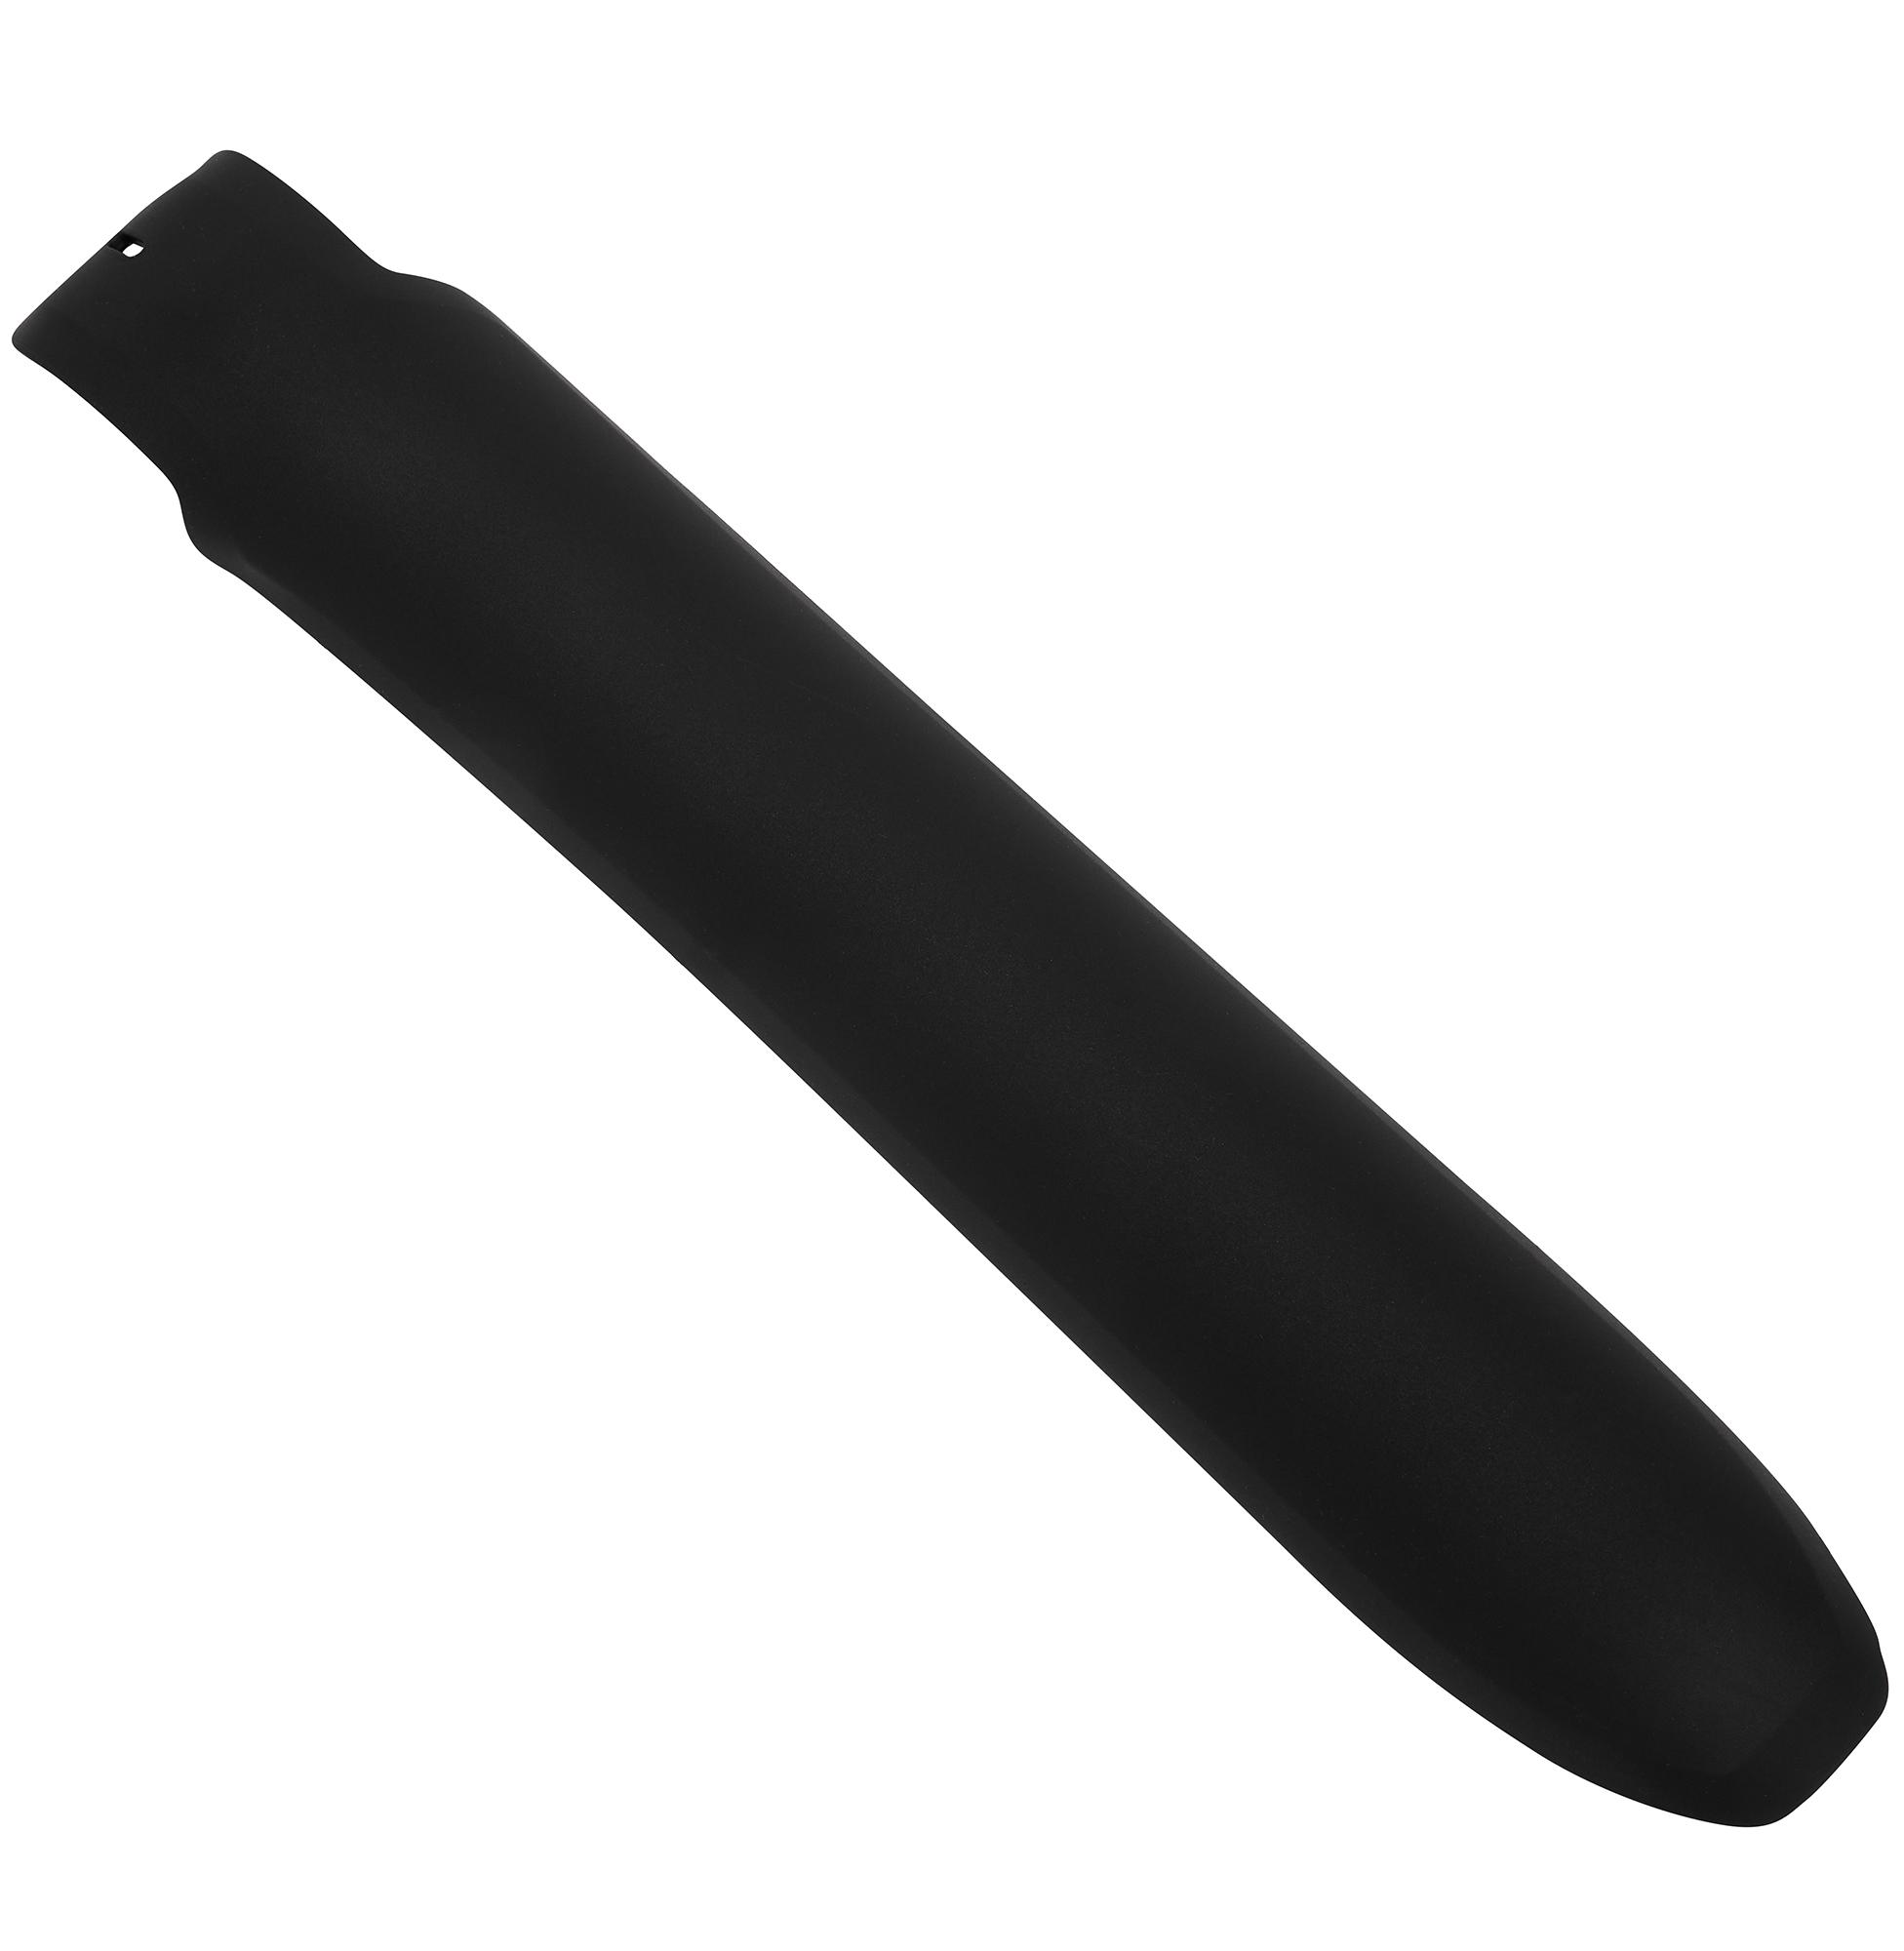 Nukeproof Dissent Carbon Downtube Protector  Black